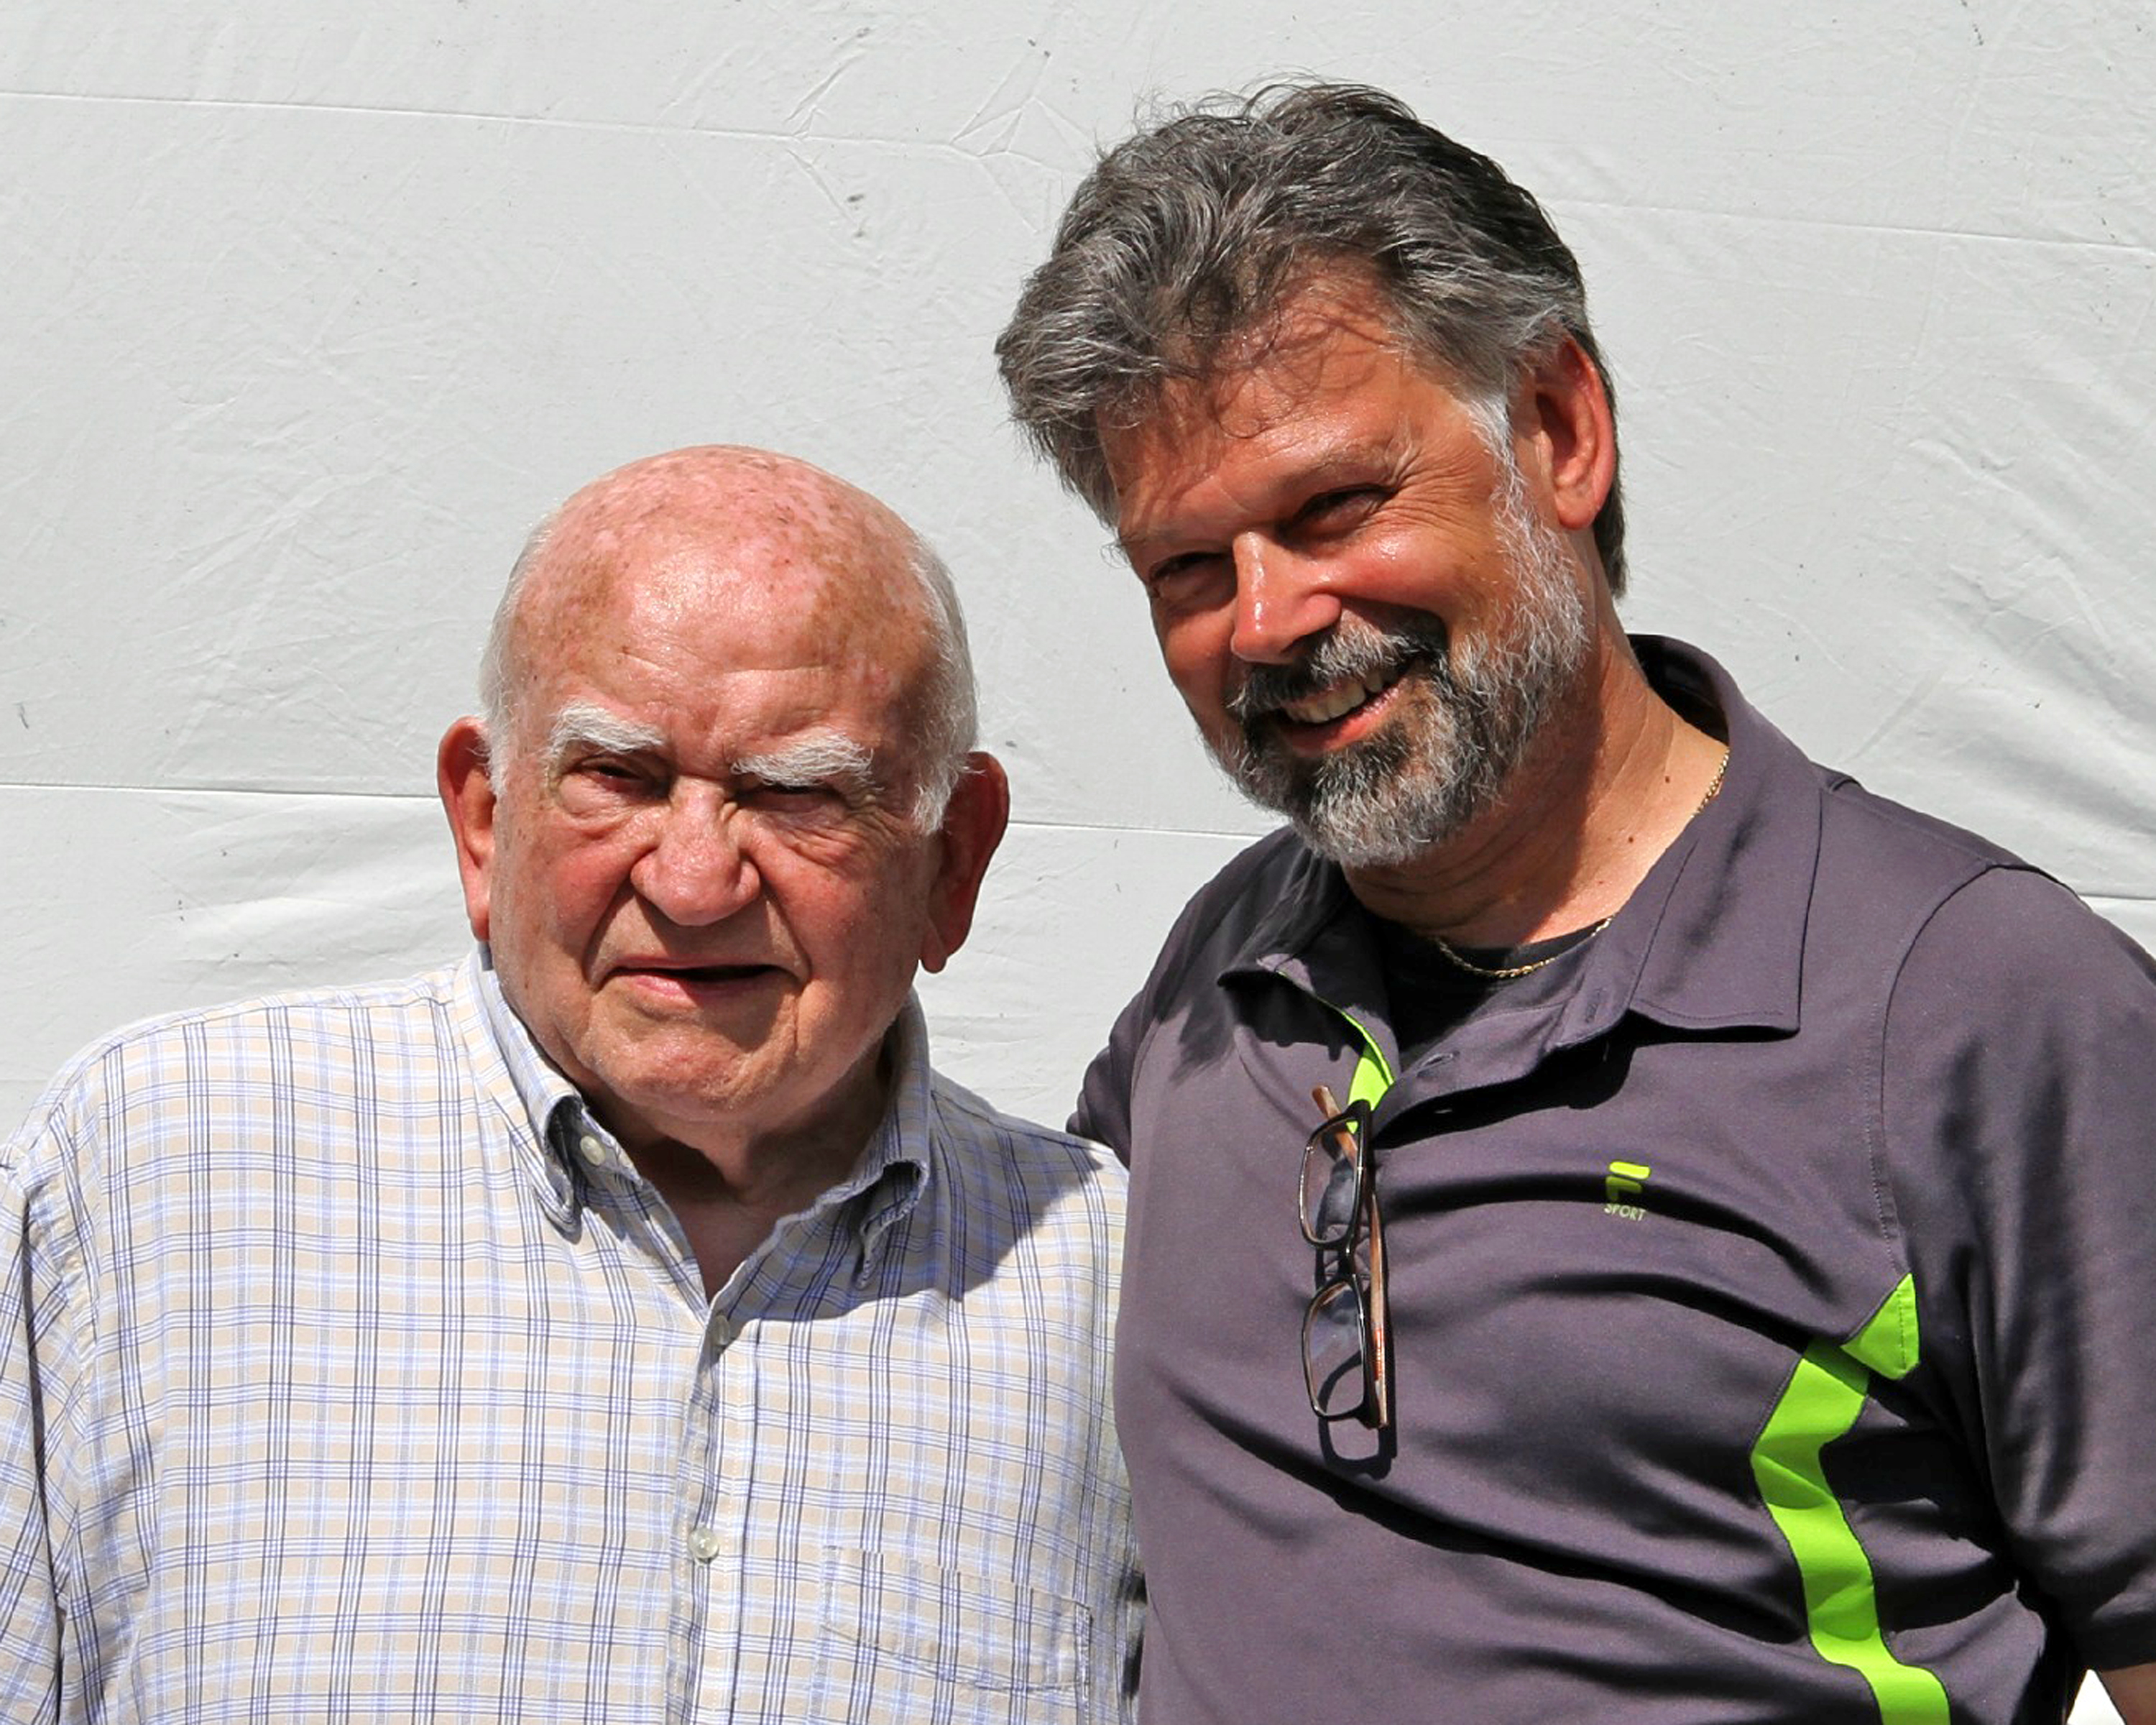 Ed Asner and Stephen R. Campanella on the set of Love Finds You in Valentine